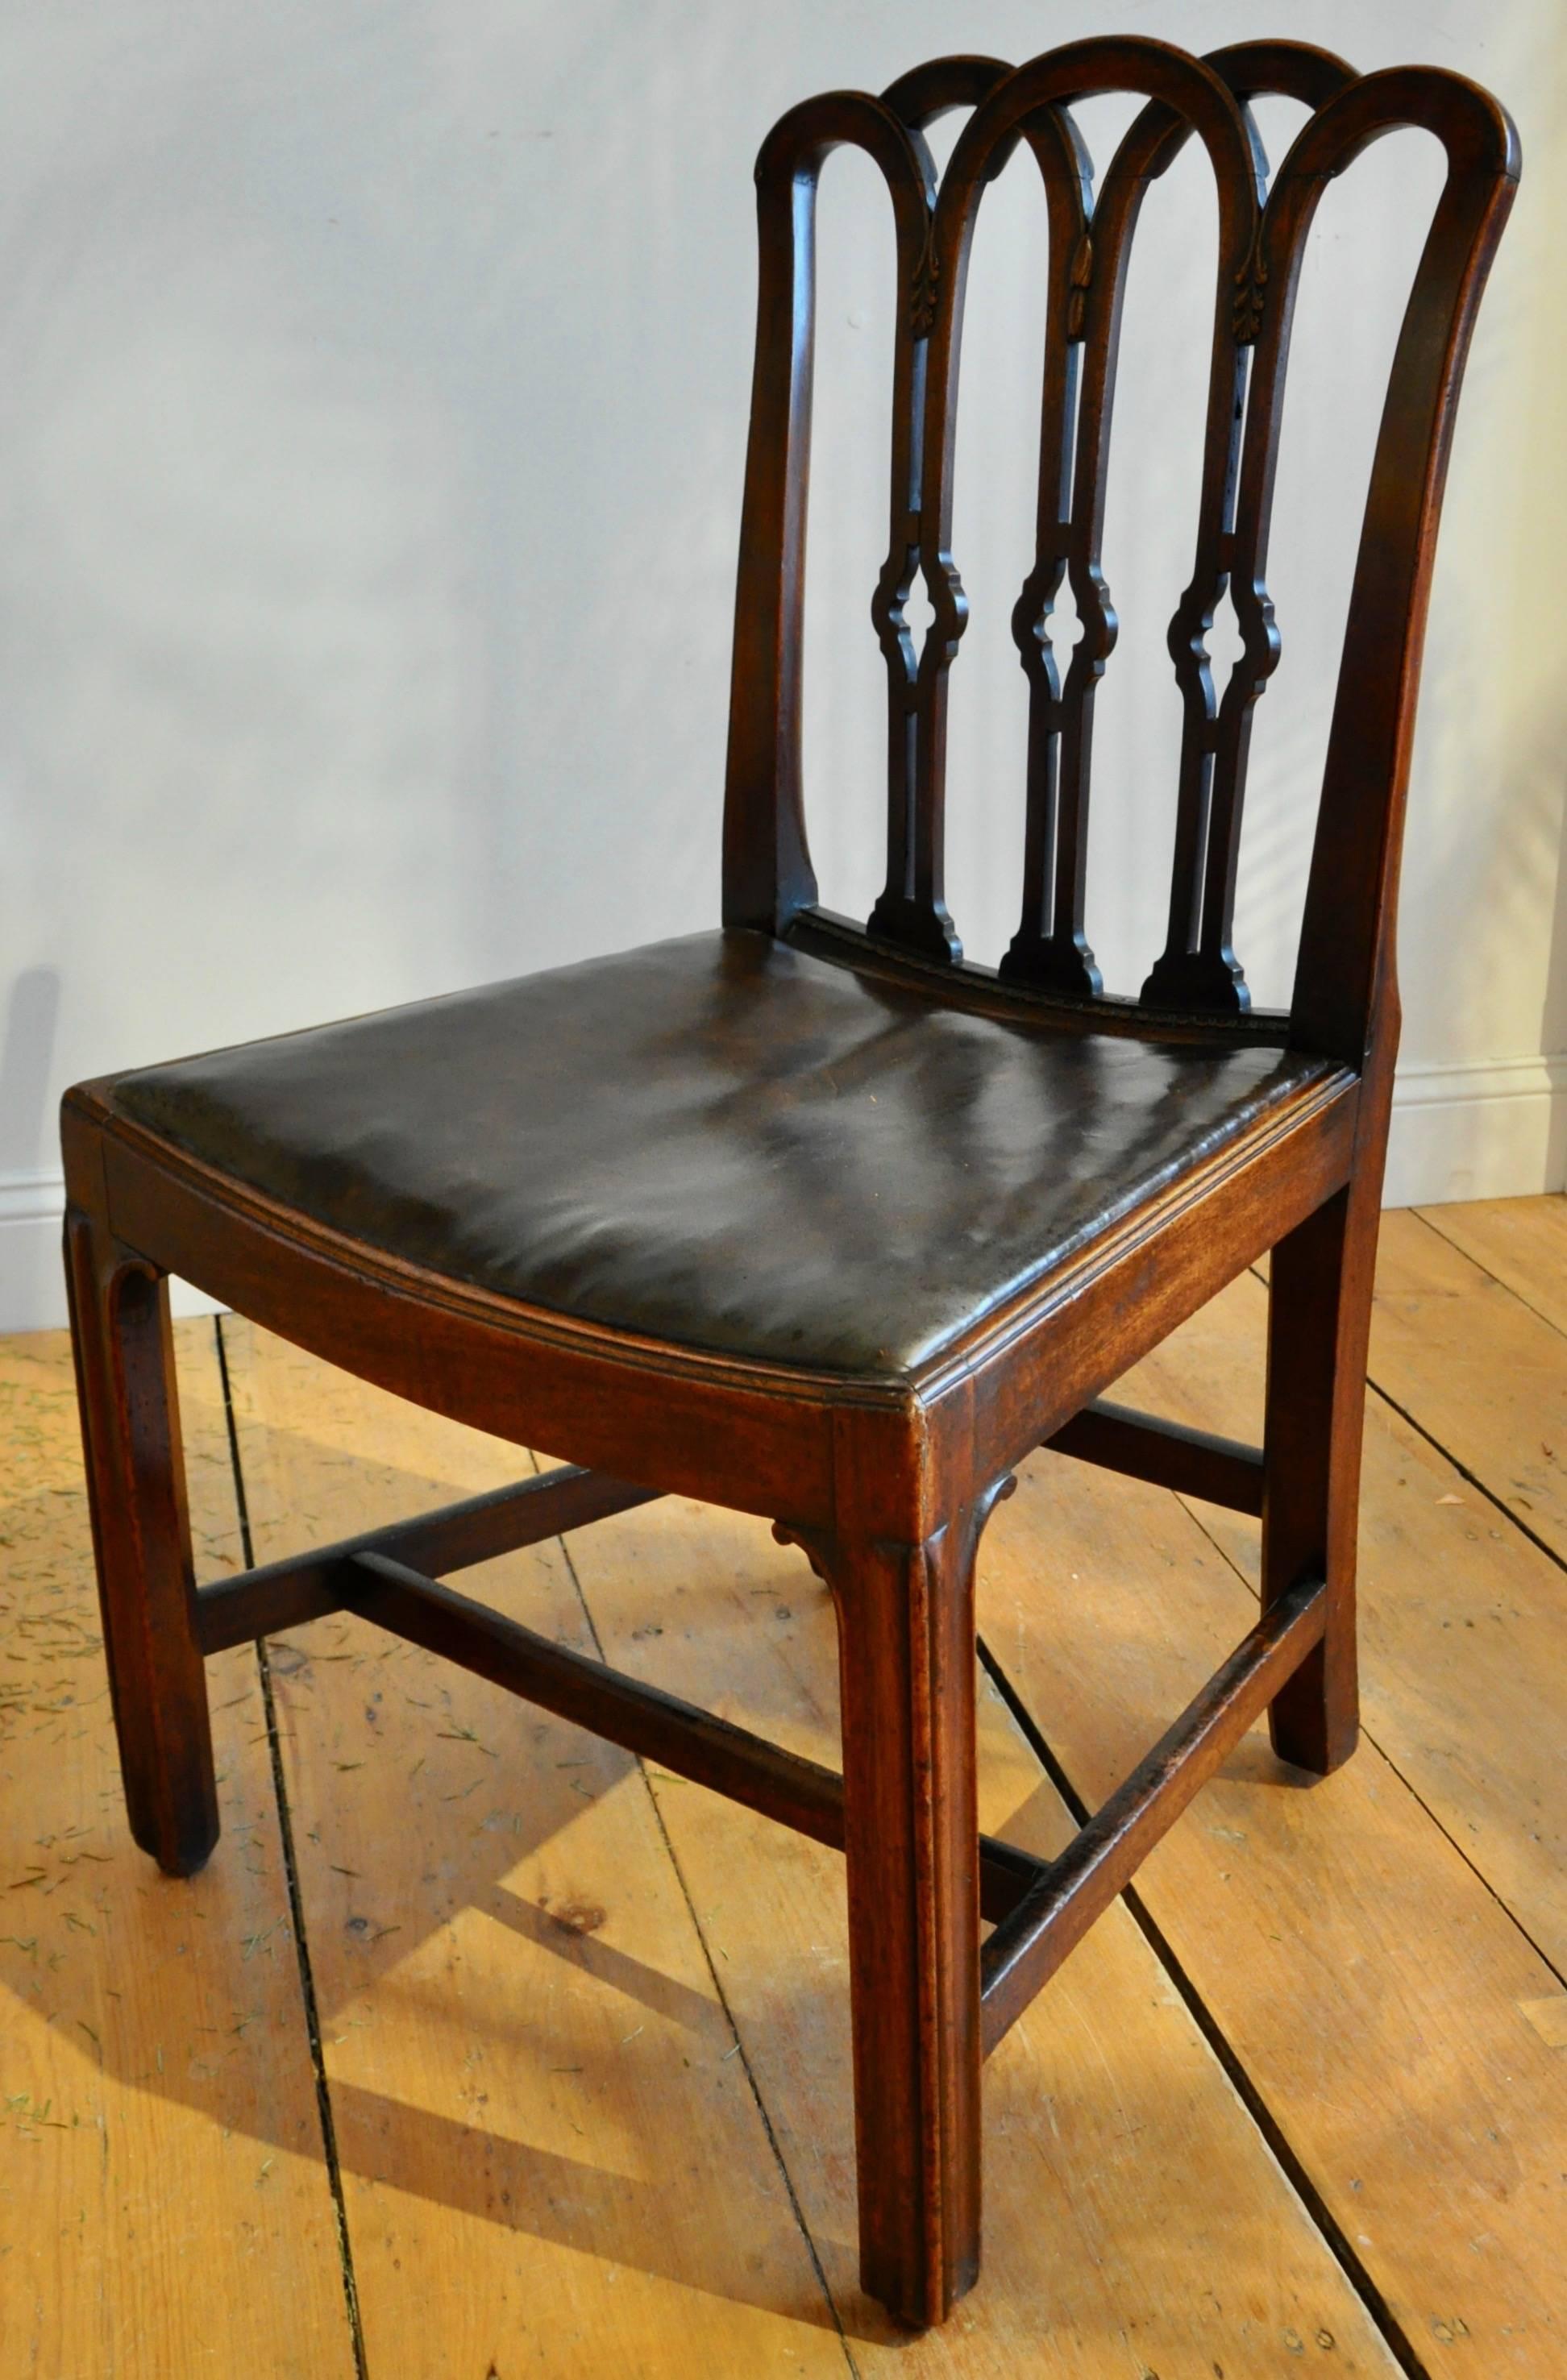 Ten Period Georgian Mahogany Dining Chairs of the Chippendale Period

--all sides
--great original saddle seats
--exquisite carving and patina
